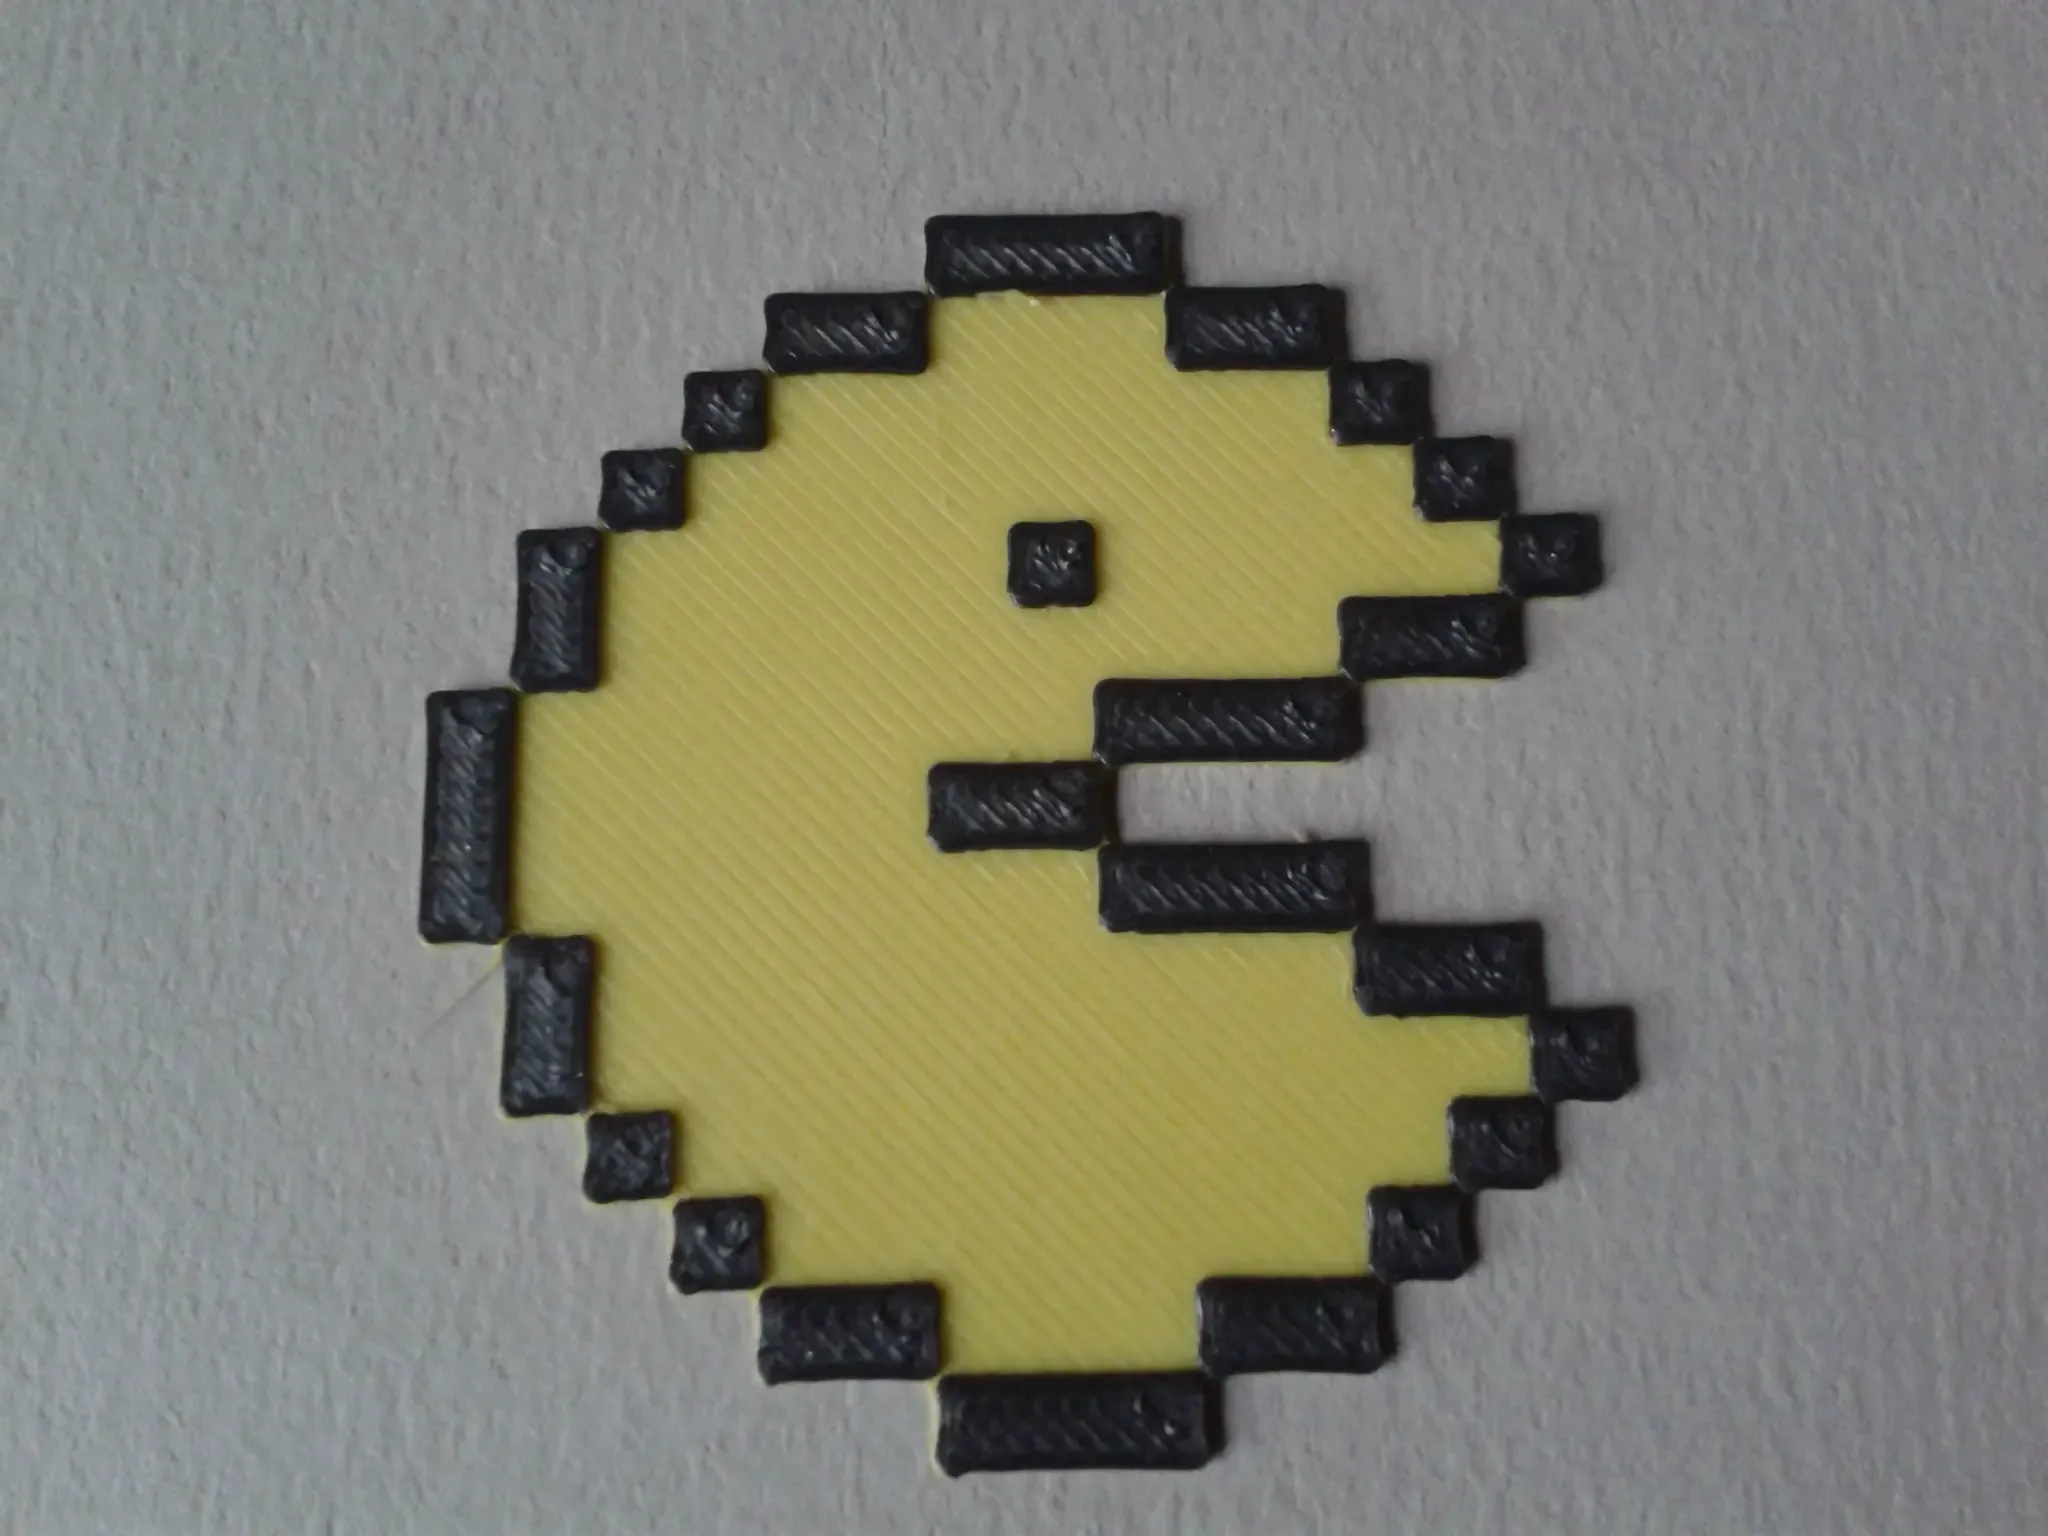 Pacman, with 1 filament changes